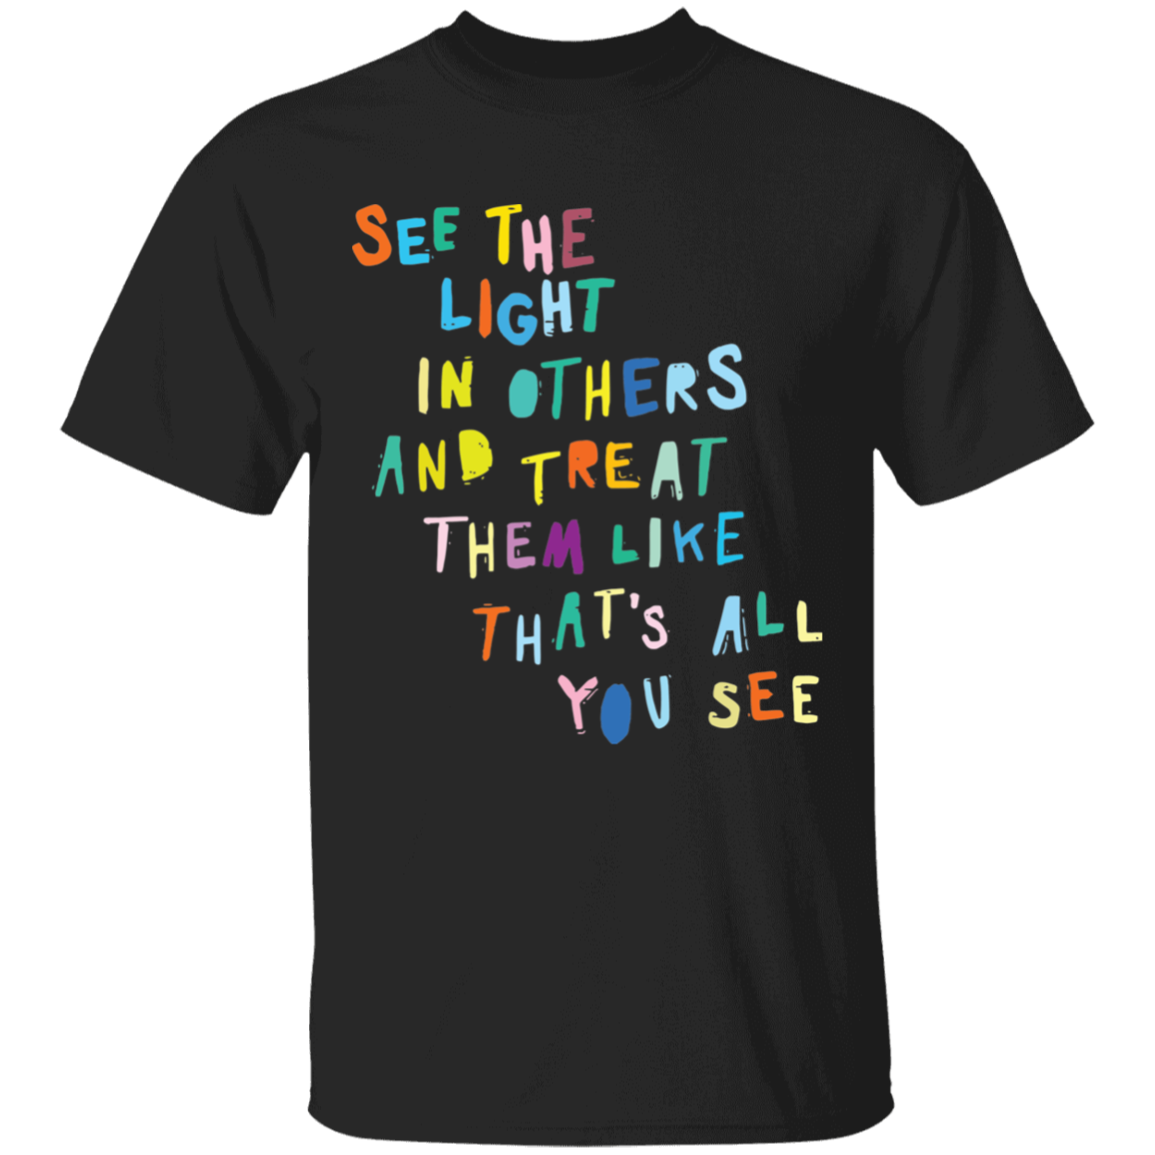 See the light in others and treat them like shirt